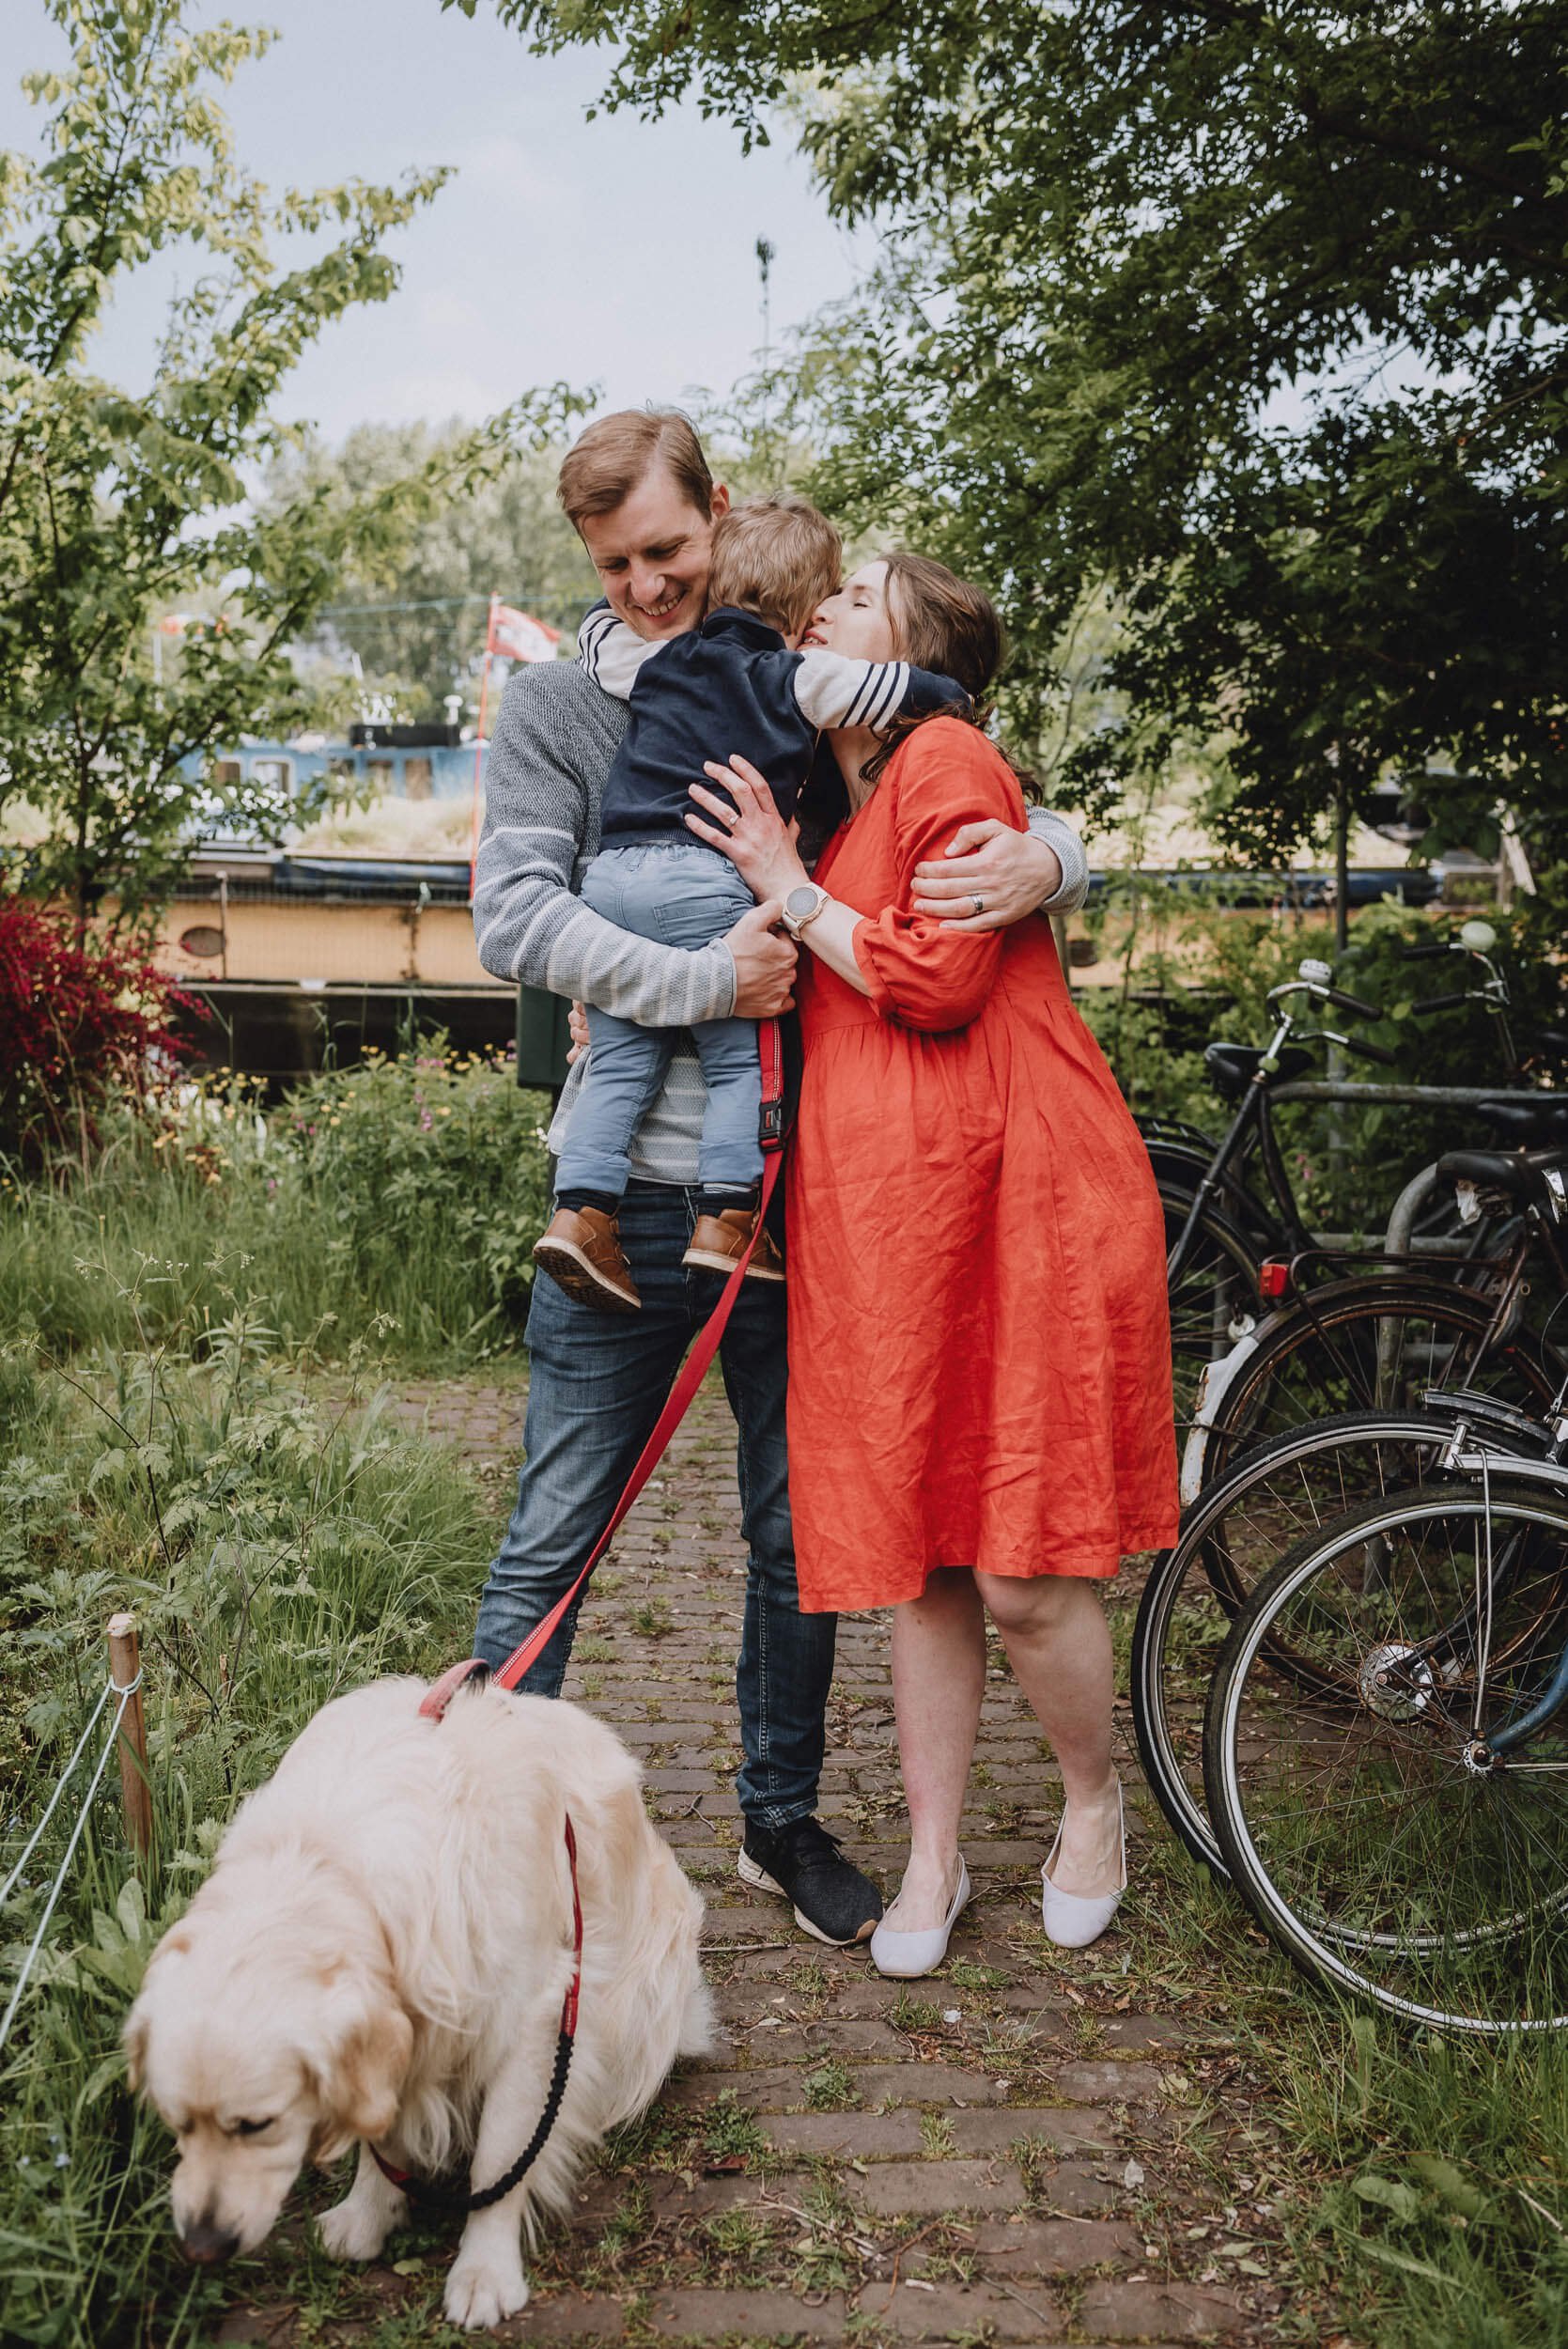 Vicky McLachlan Photography | Amsterdam Maternity Photographer | Singels family_24